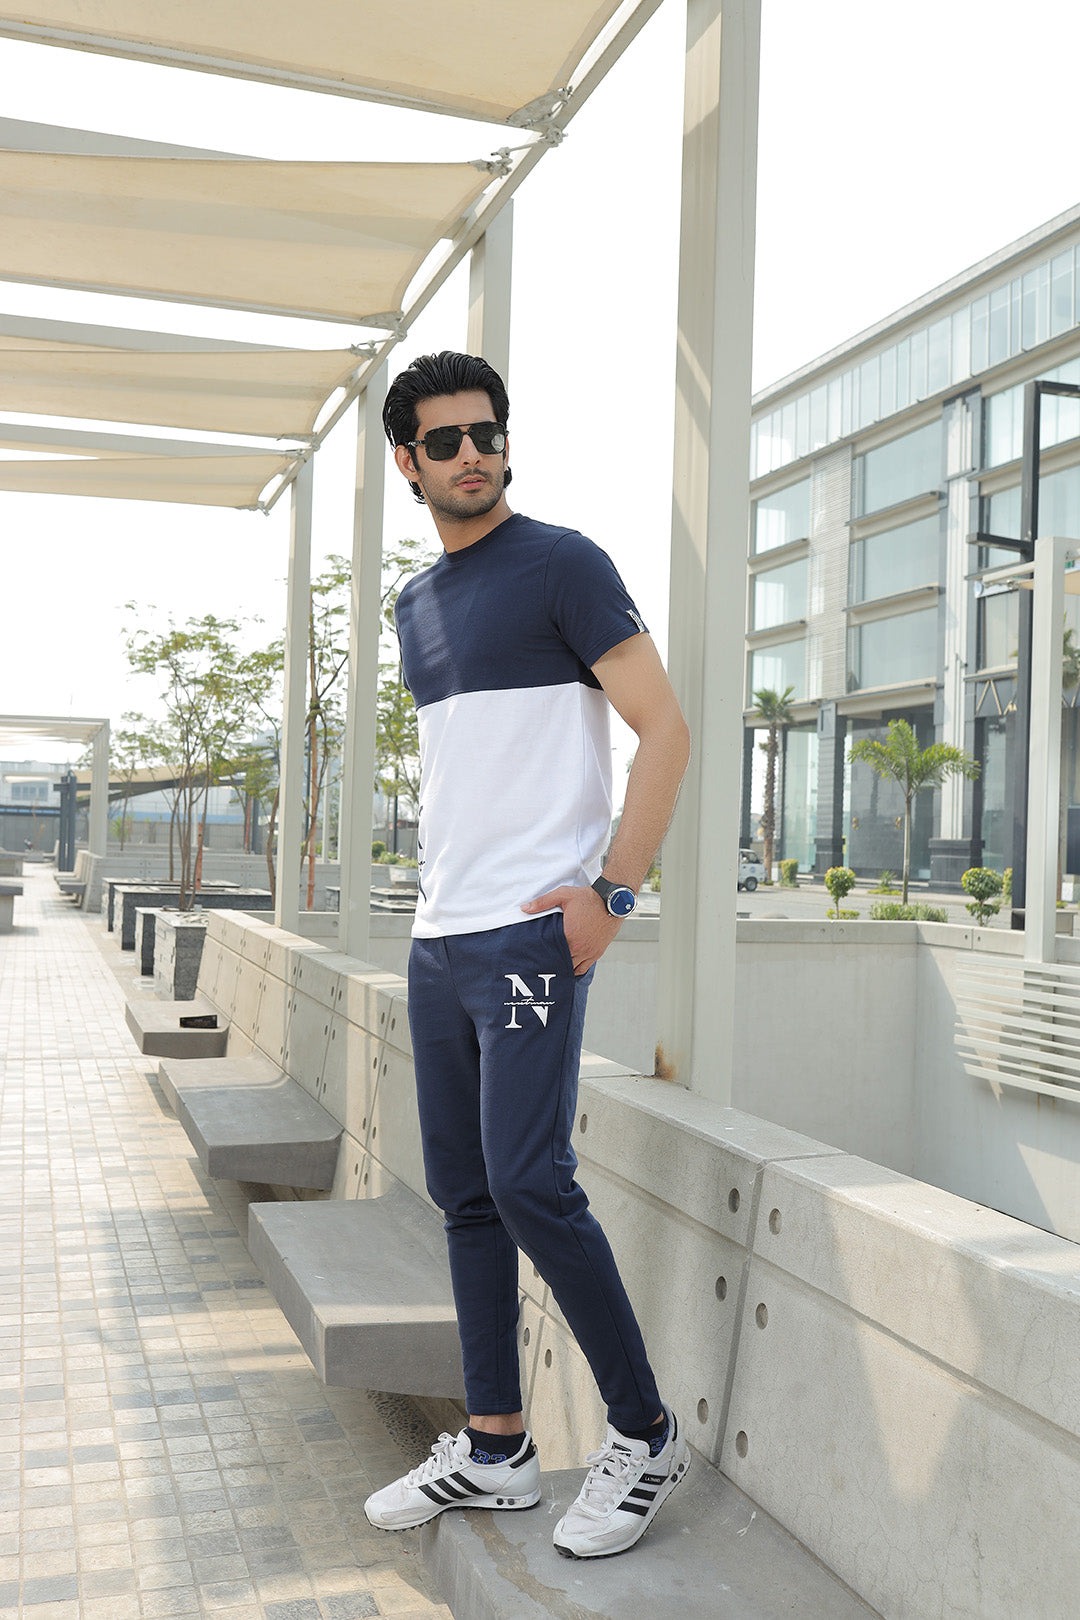 nextage mens track suits in pakistan, 